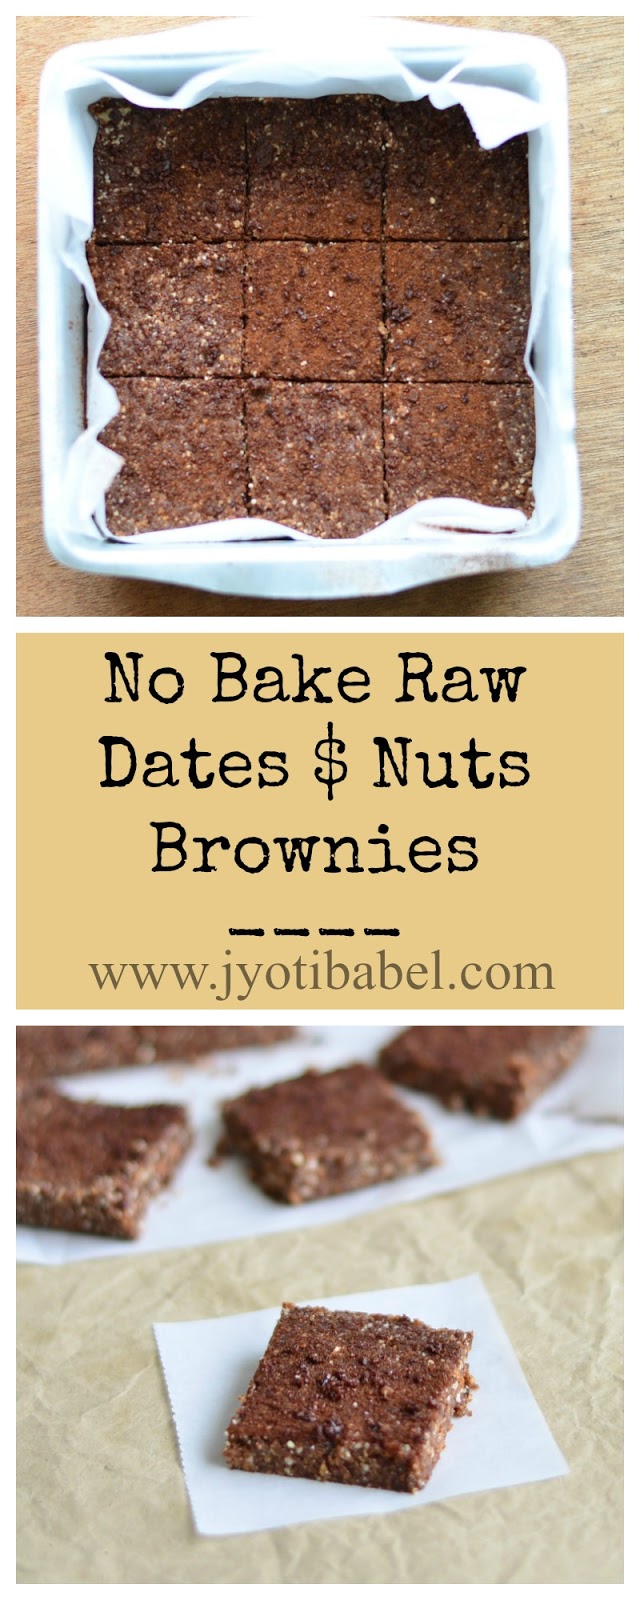 No Bake Dates and Nuts Brownies | A healthy, quick and raw brownie made with a handful of ingredients. www.jyotibabel.com